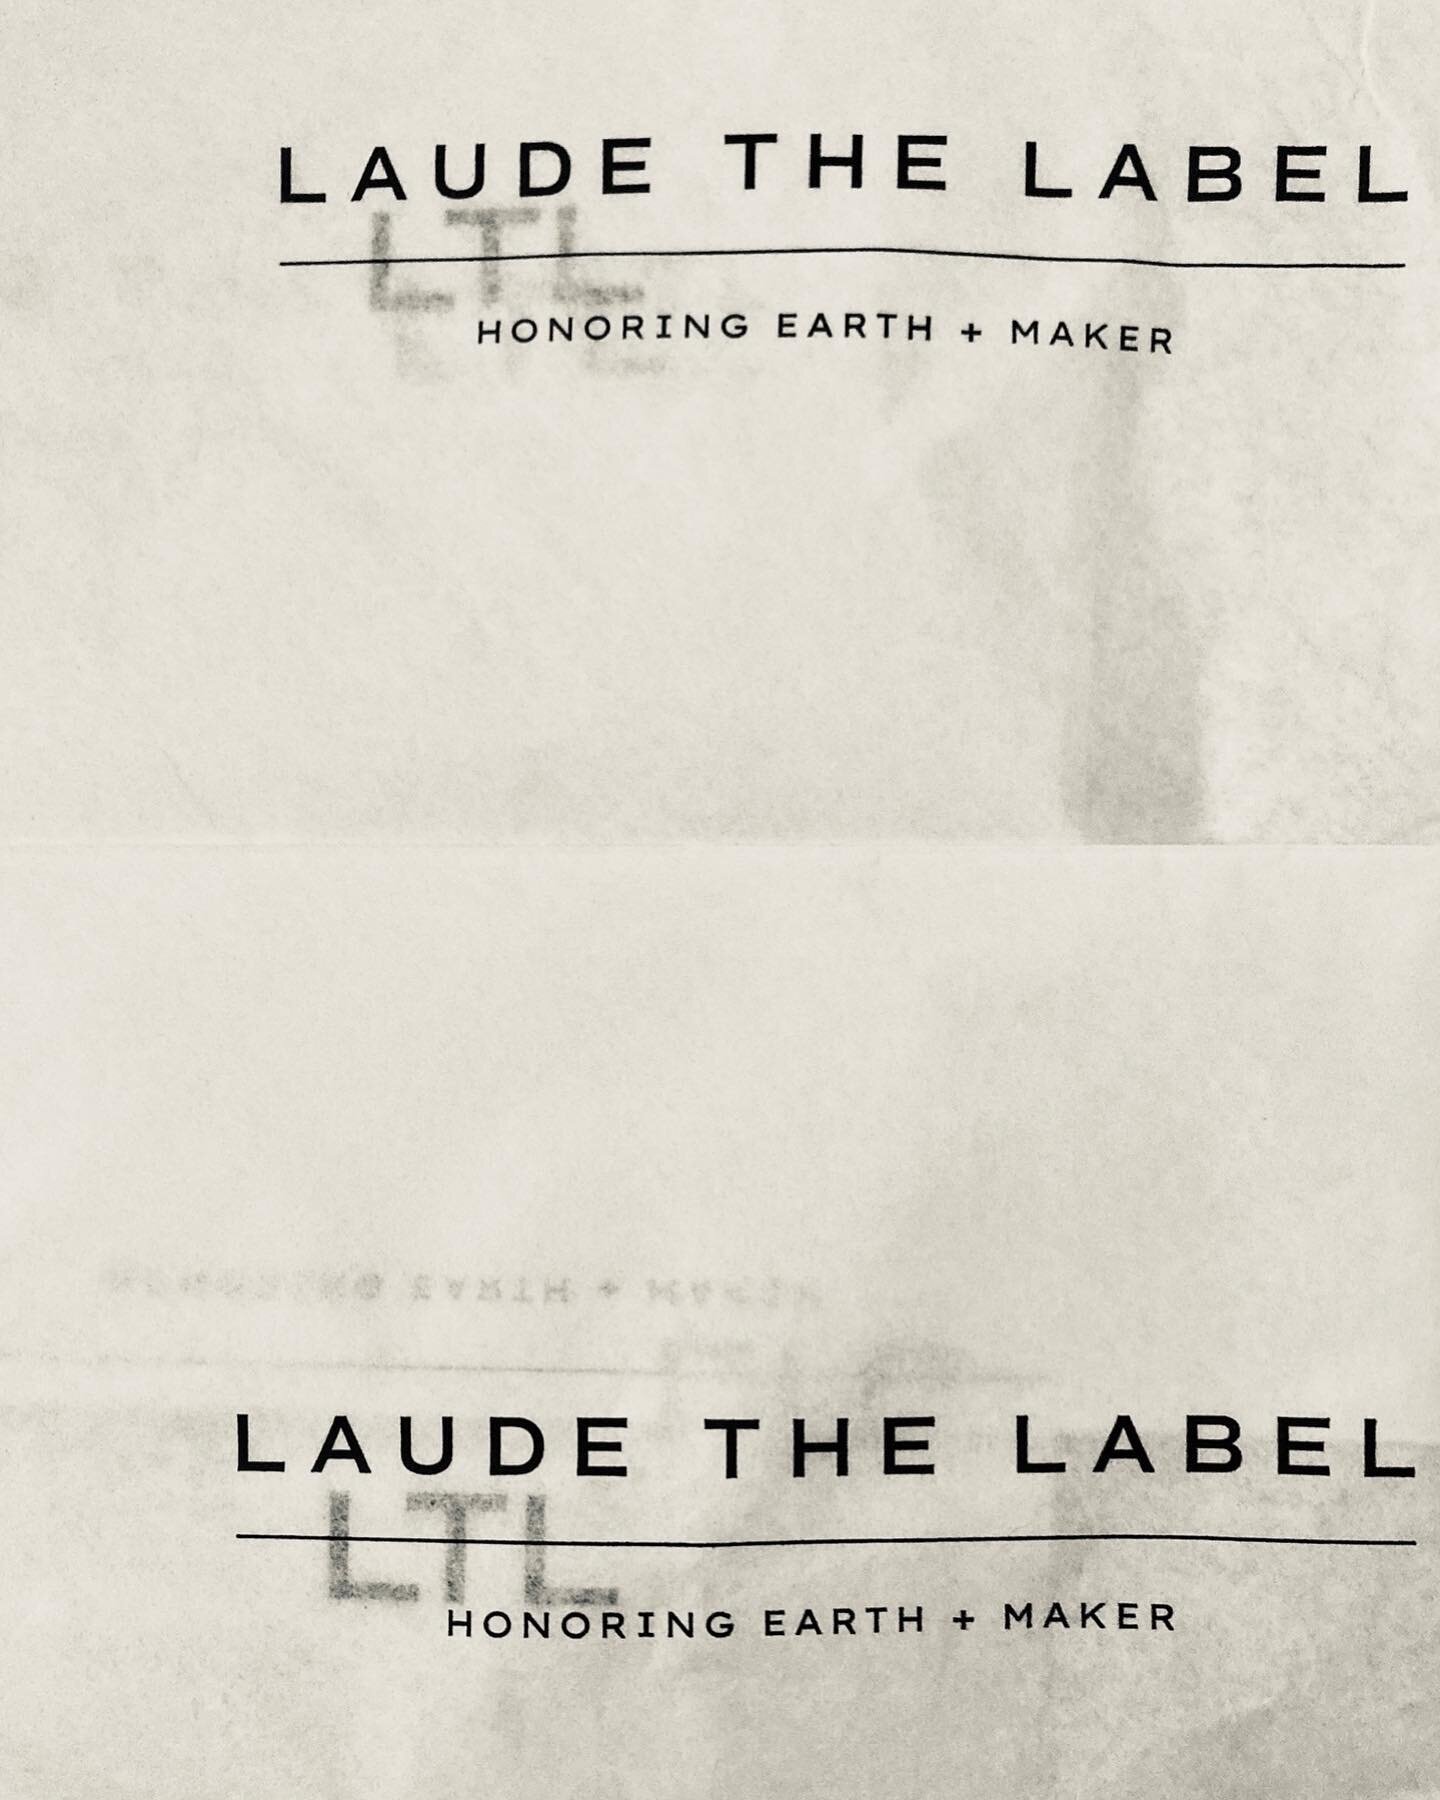 Delicate tissue paper from @laudethelabel 
⁠
Love when brands create custom tissue paper patterned with their logos, it&rsquo;s an extra intention that makes the unboxing experience so special.

When we work together, you get a logo suite of at least